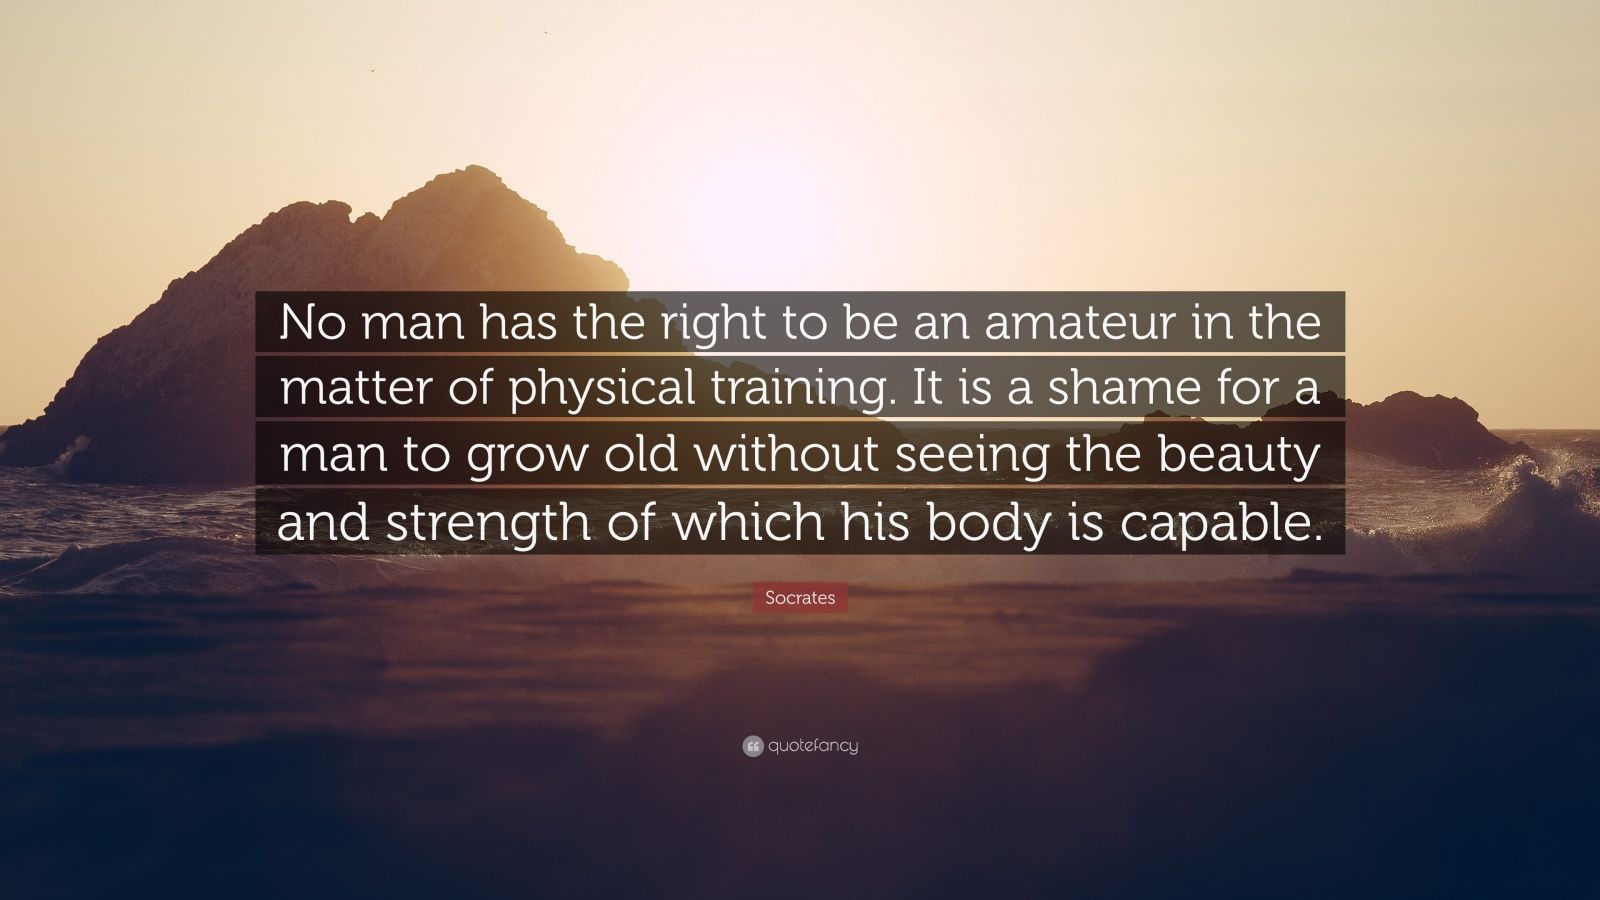 Socrates Quote: “No man has the right to be an amateur in the matter of